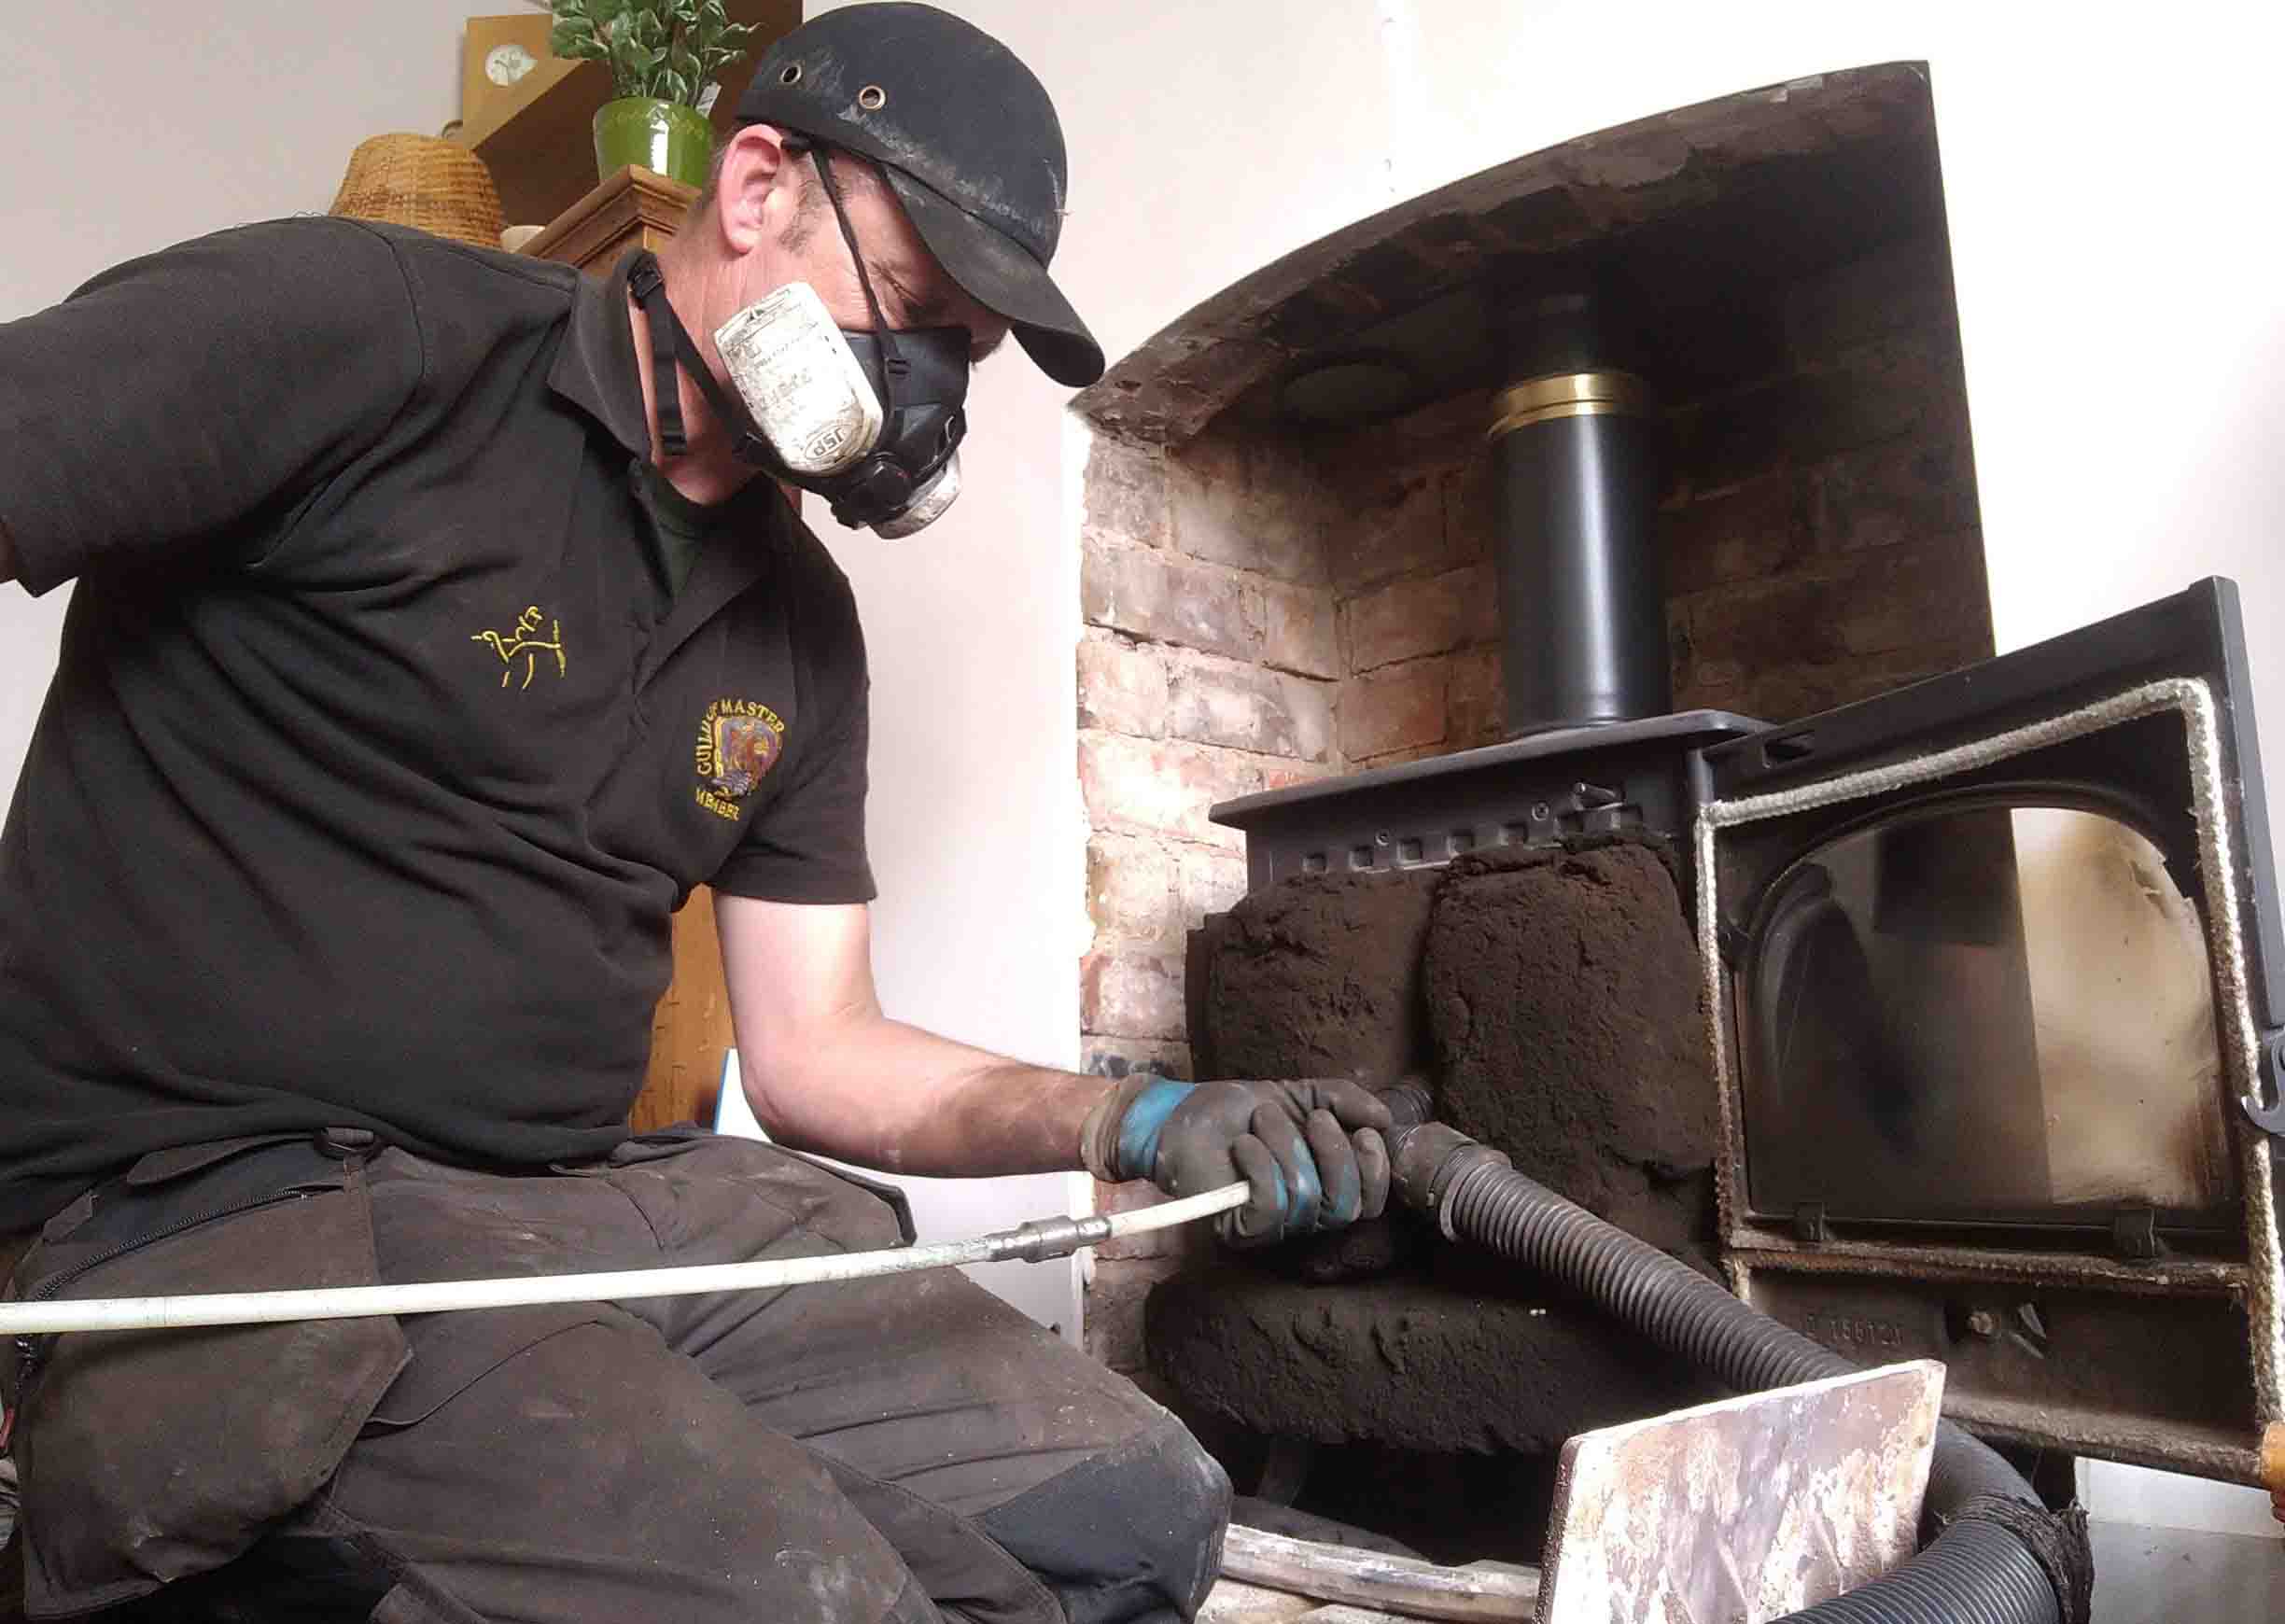 A Chimney Sweep stove cleaning hoover